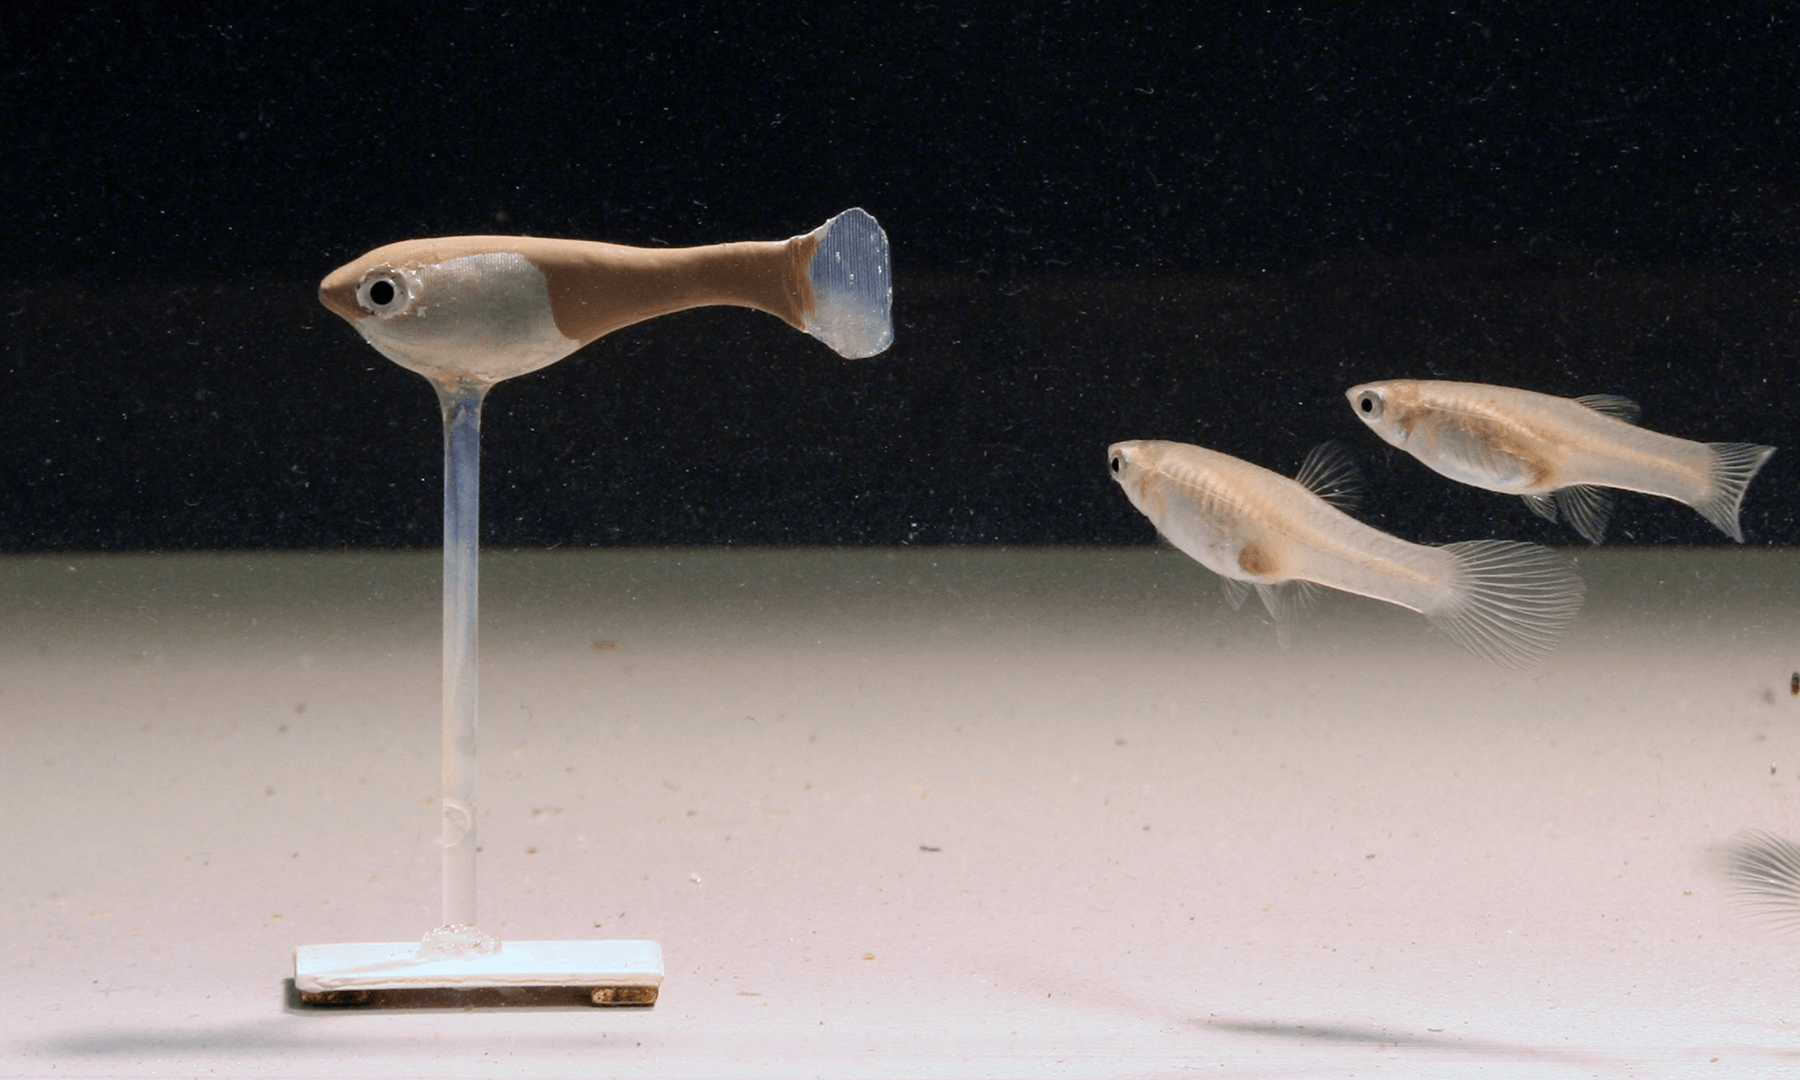 Robotic fish in water next to two real fish